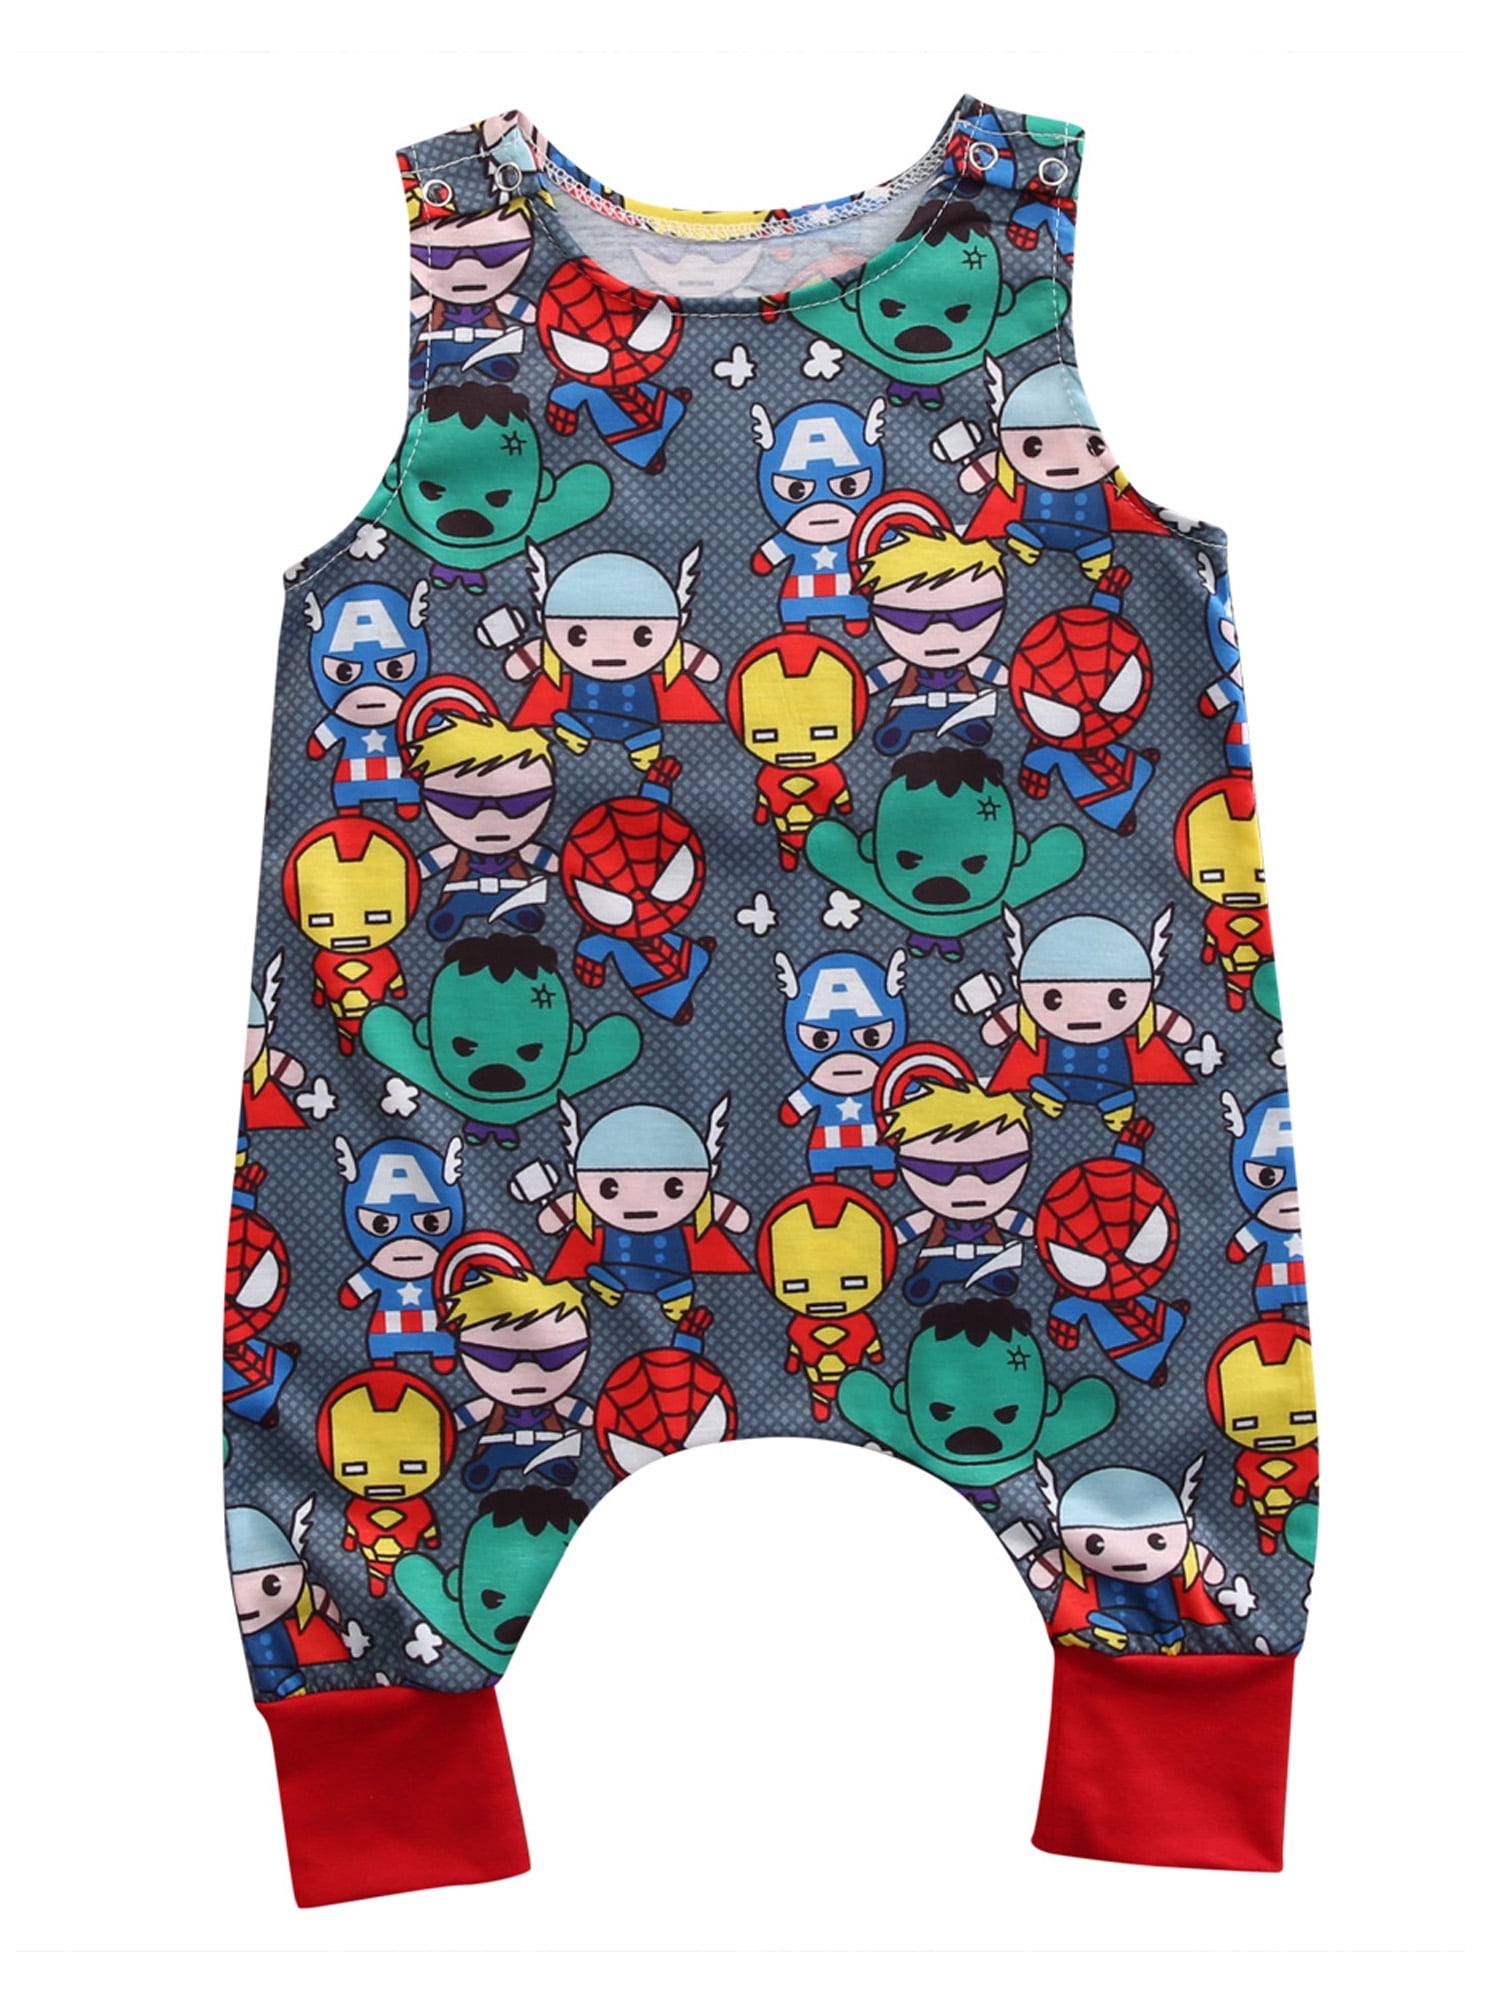 Kids Baby Boys Girls Infant Cartoon Print Sleeveless Jumpsuit Rompers Outfits